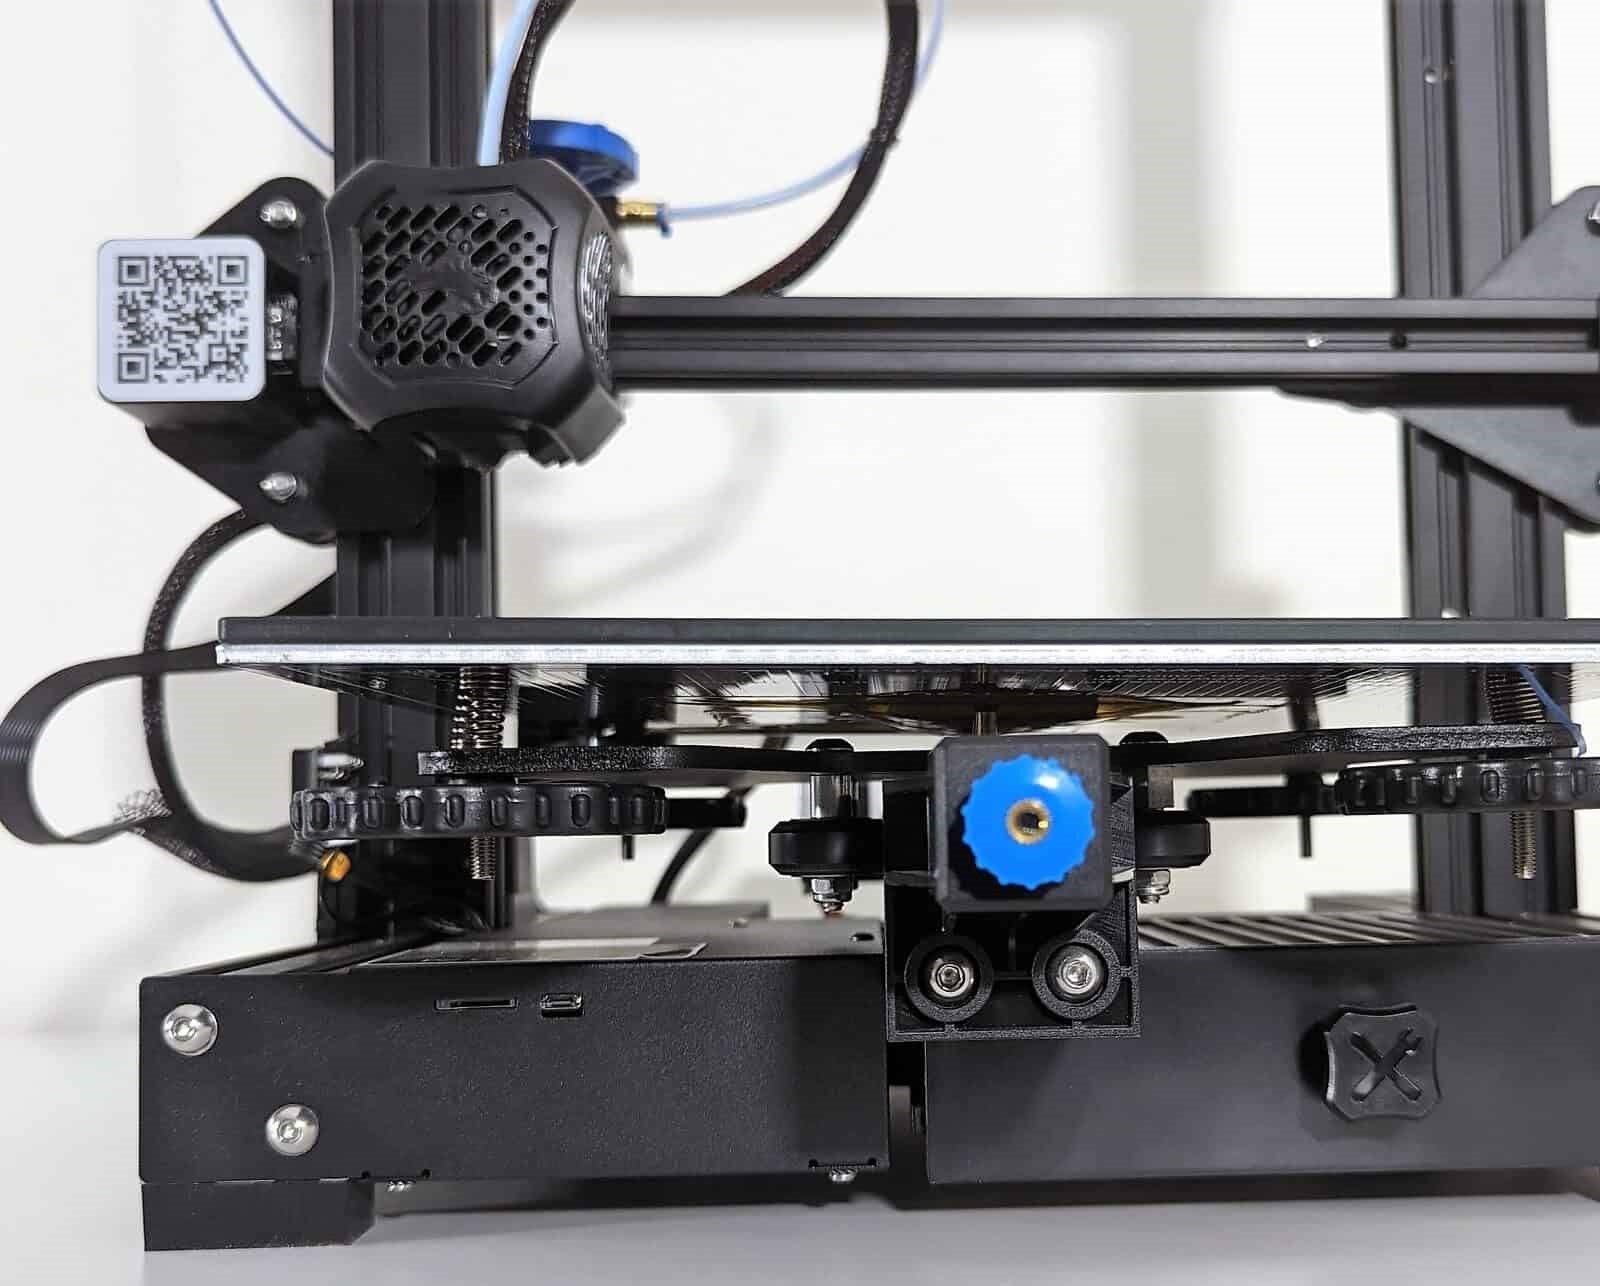 How Hot Should My 3D Printer Bed Be